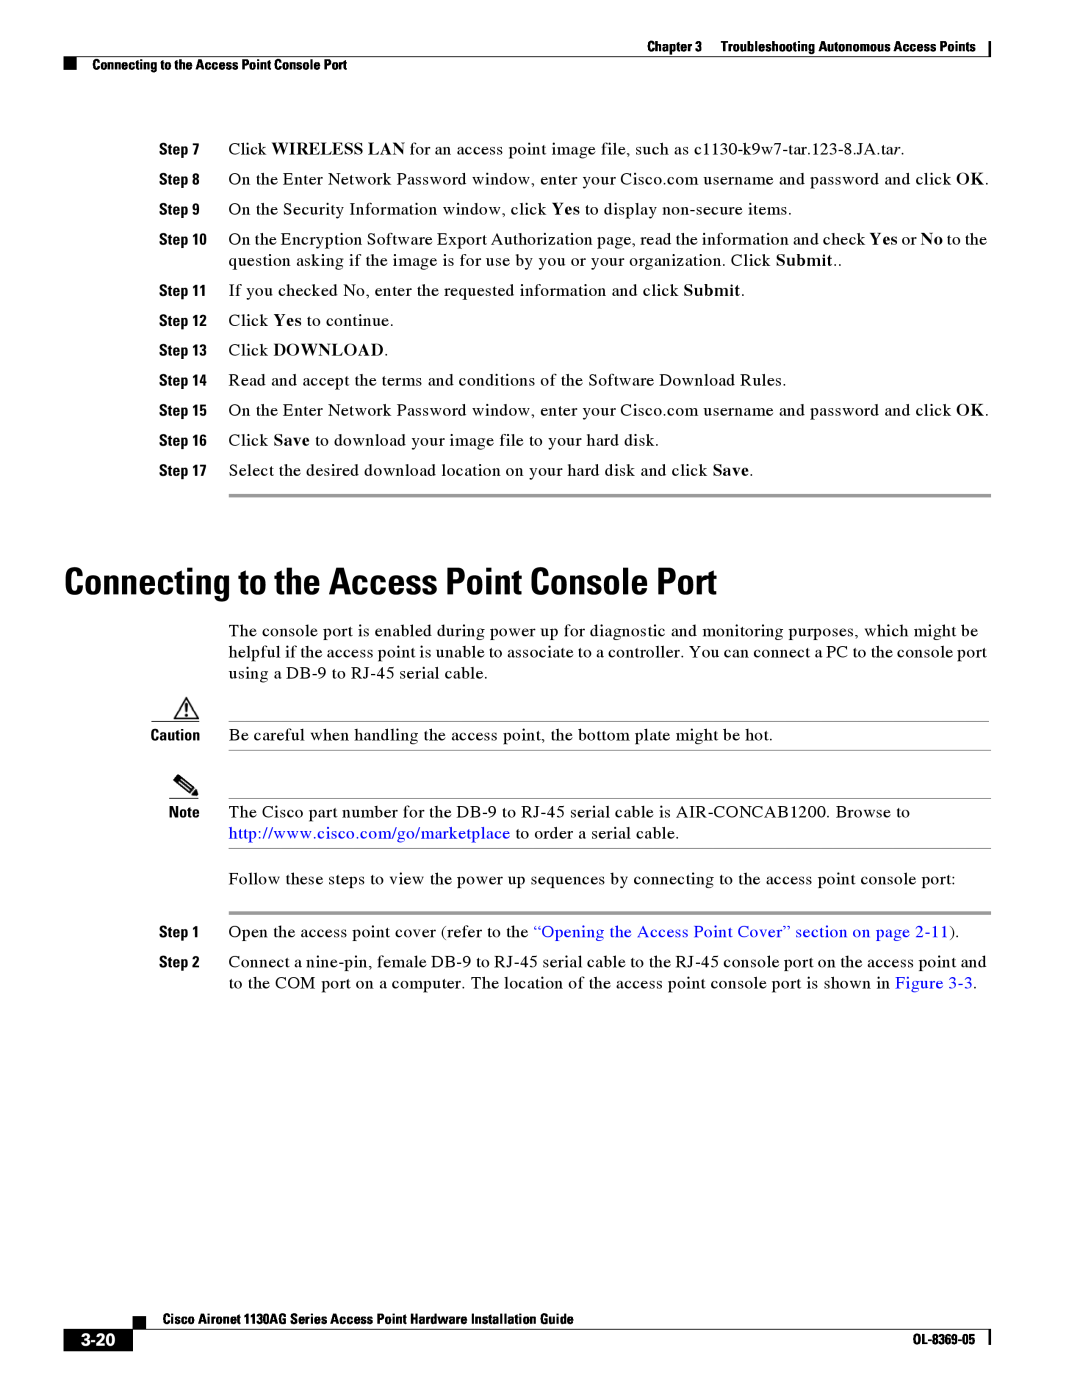 Cisco Systems 1130AG manual Connecting to the Access Point Console Port, 3-20, Click DOWNLOAD 